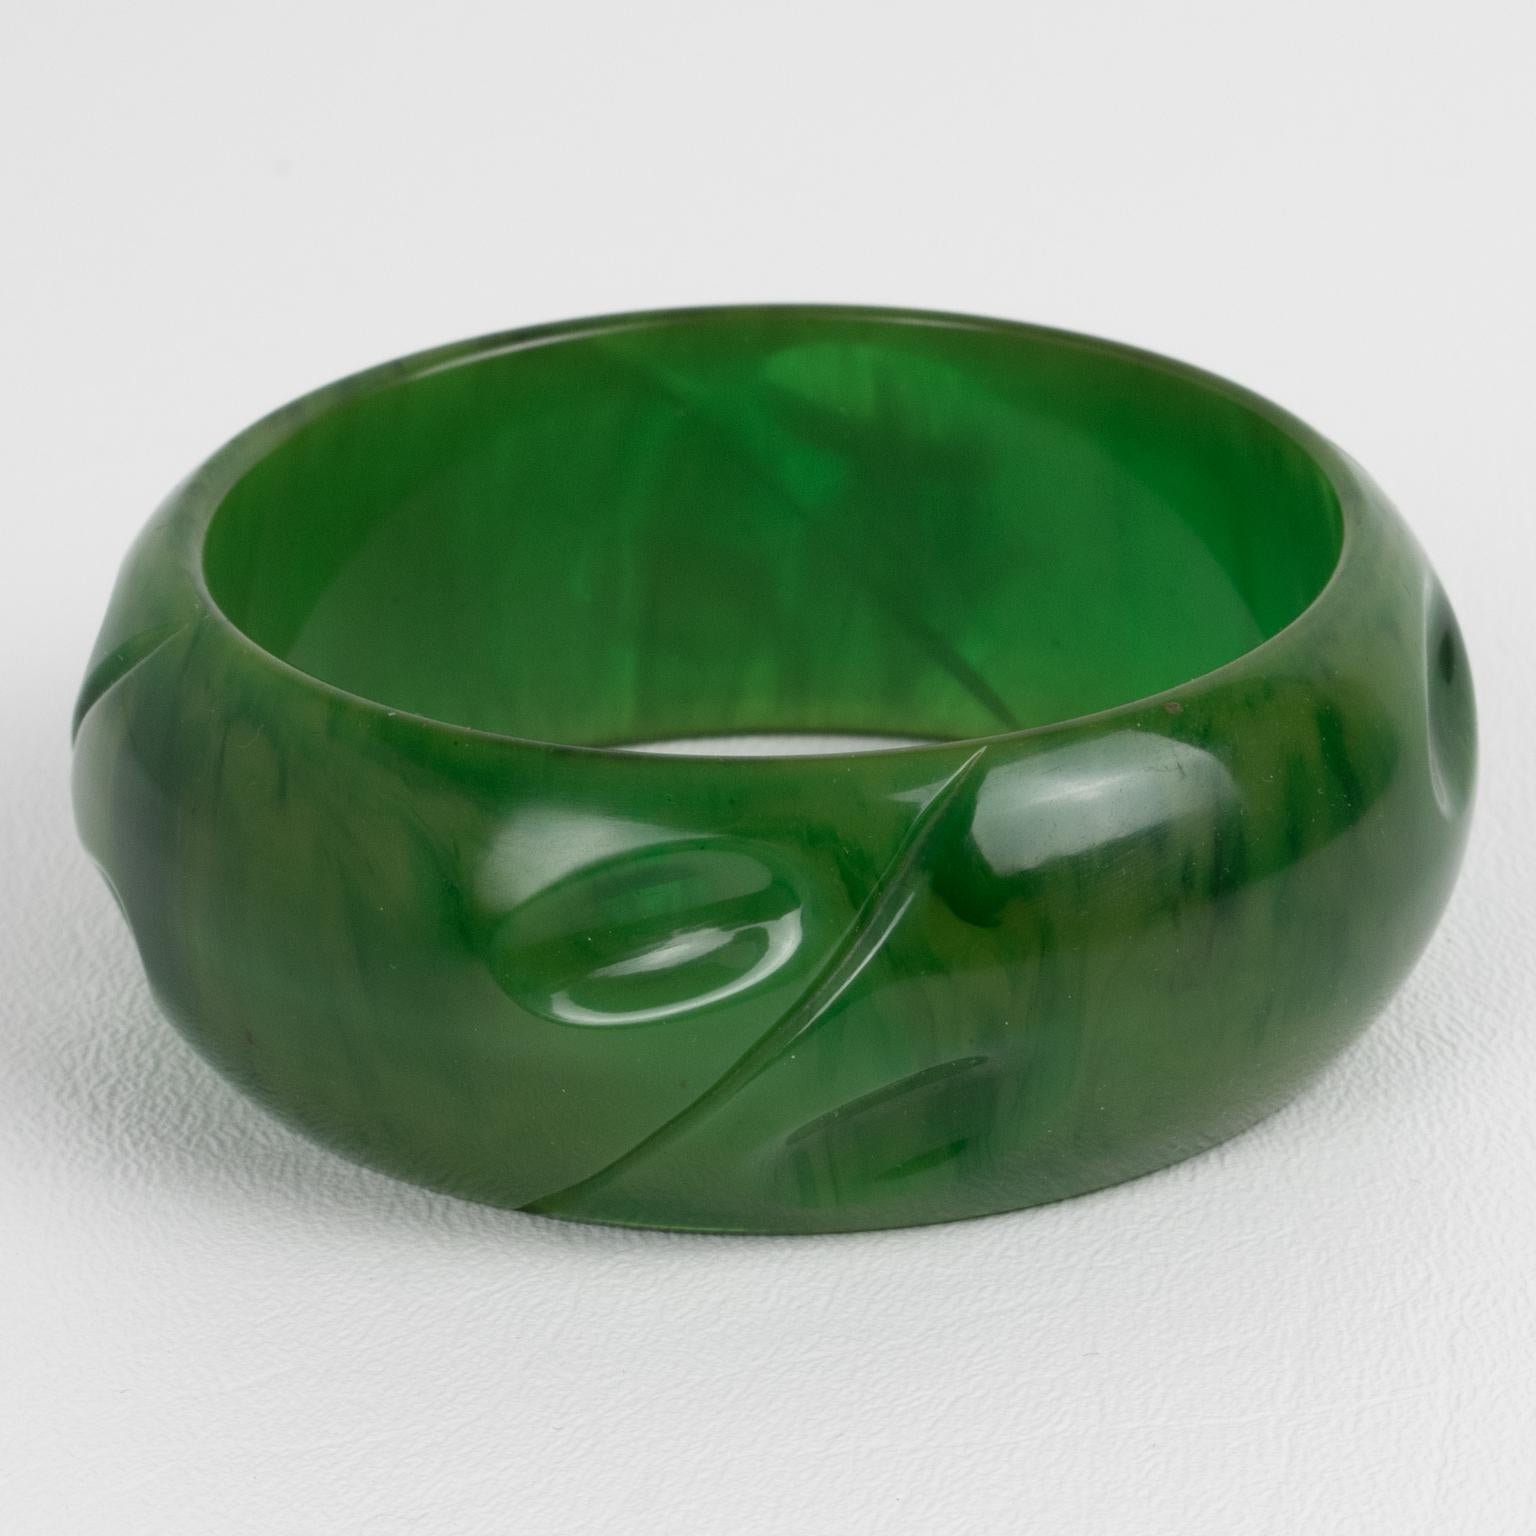 This is a stunning basil green marble Bakelite carved bracelet bangle. It features a chunky domed shape with a geometric carving design all around. The color is an intense green marble tone with cloudy swirling. 
Measurements: Inside across 2.63 in